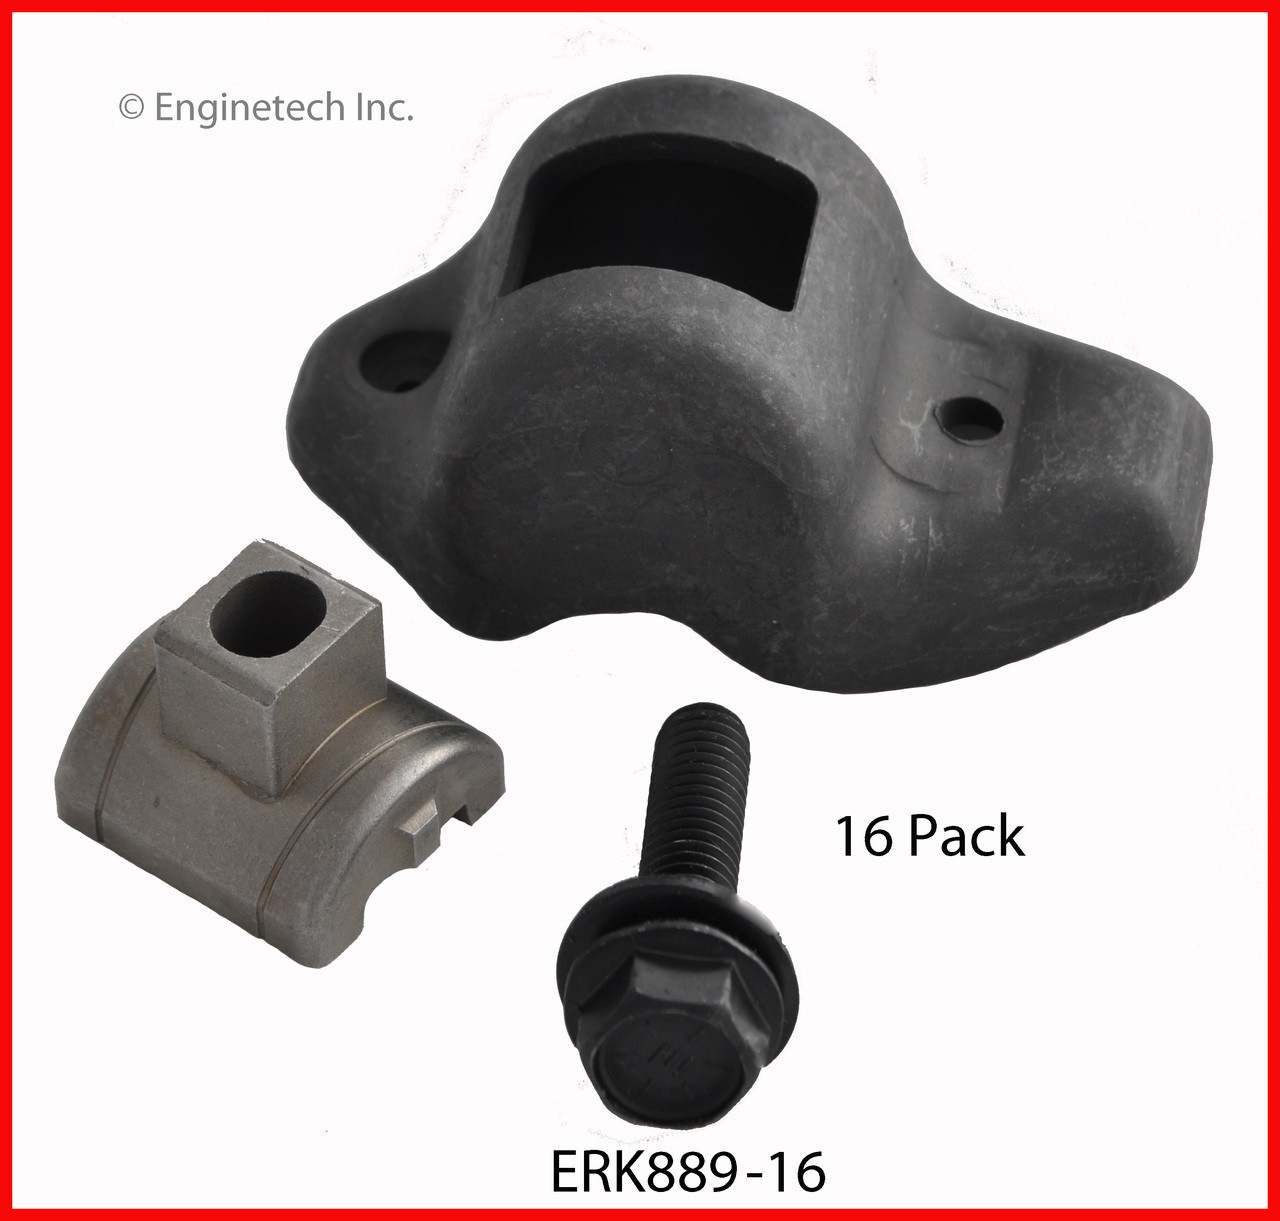 Rocker Arm Kit - 1990 Ford Country Squire 5.0L (ERK889-16.K360)